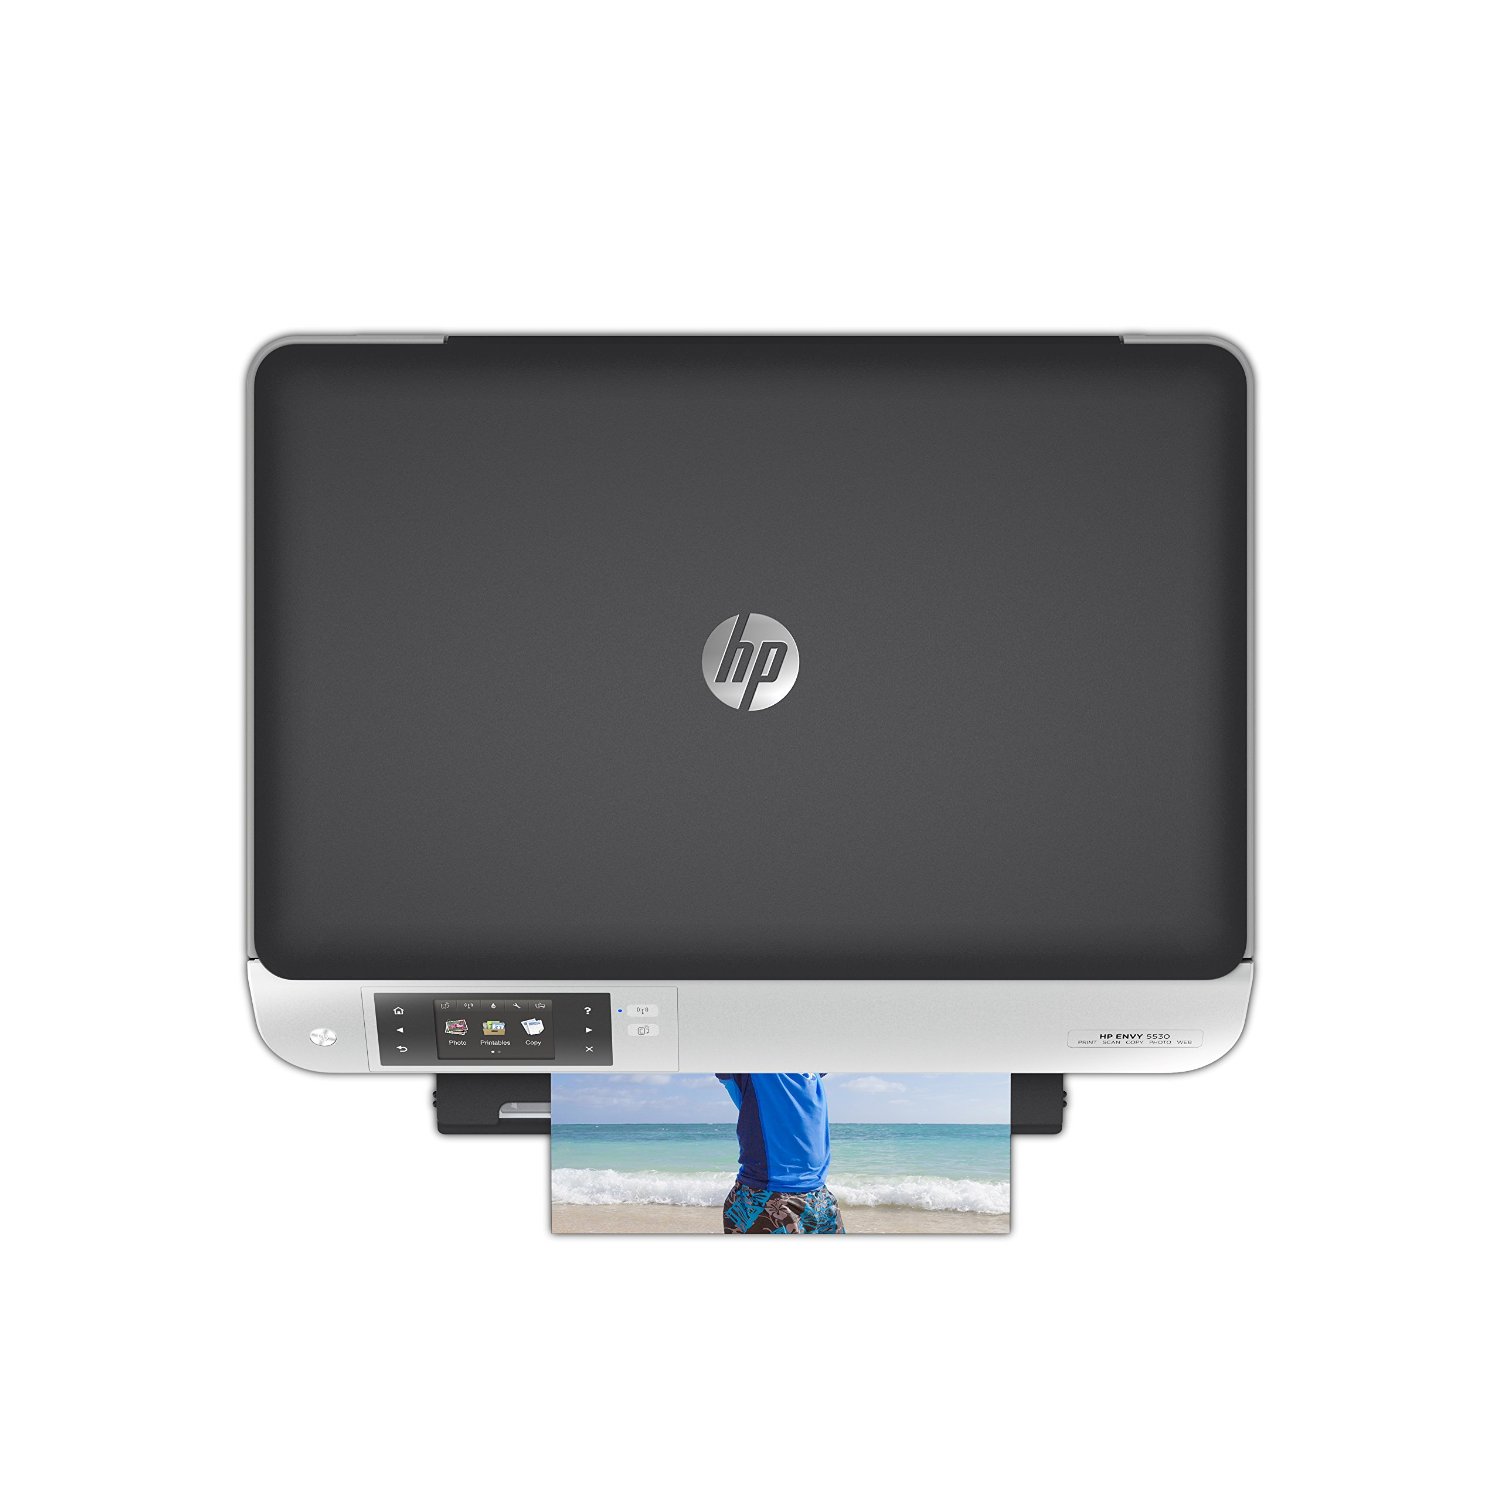 Hp Envy 5534 Wireless All In One Color Photo Printer N2 Free Image Download 5587